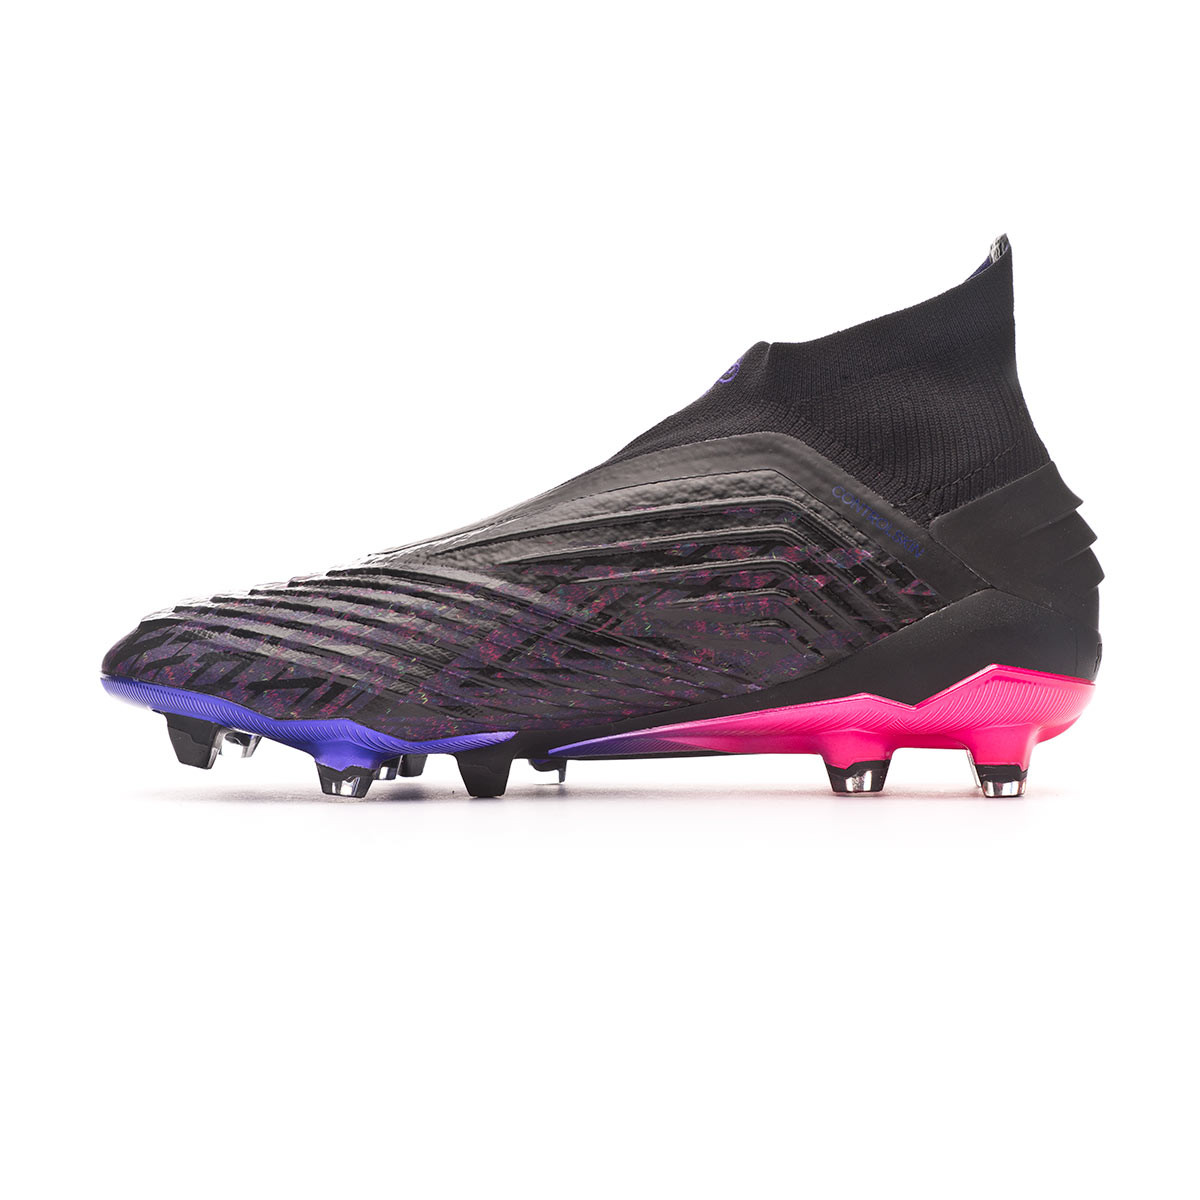 paul pogba pink boots